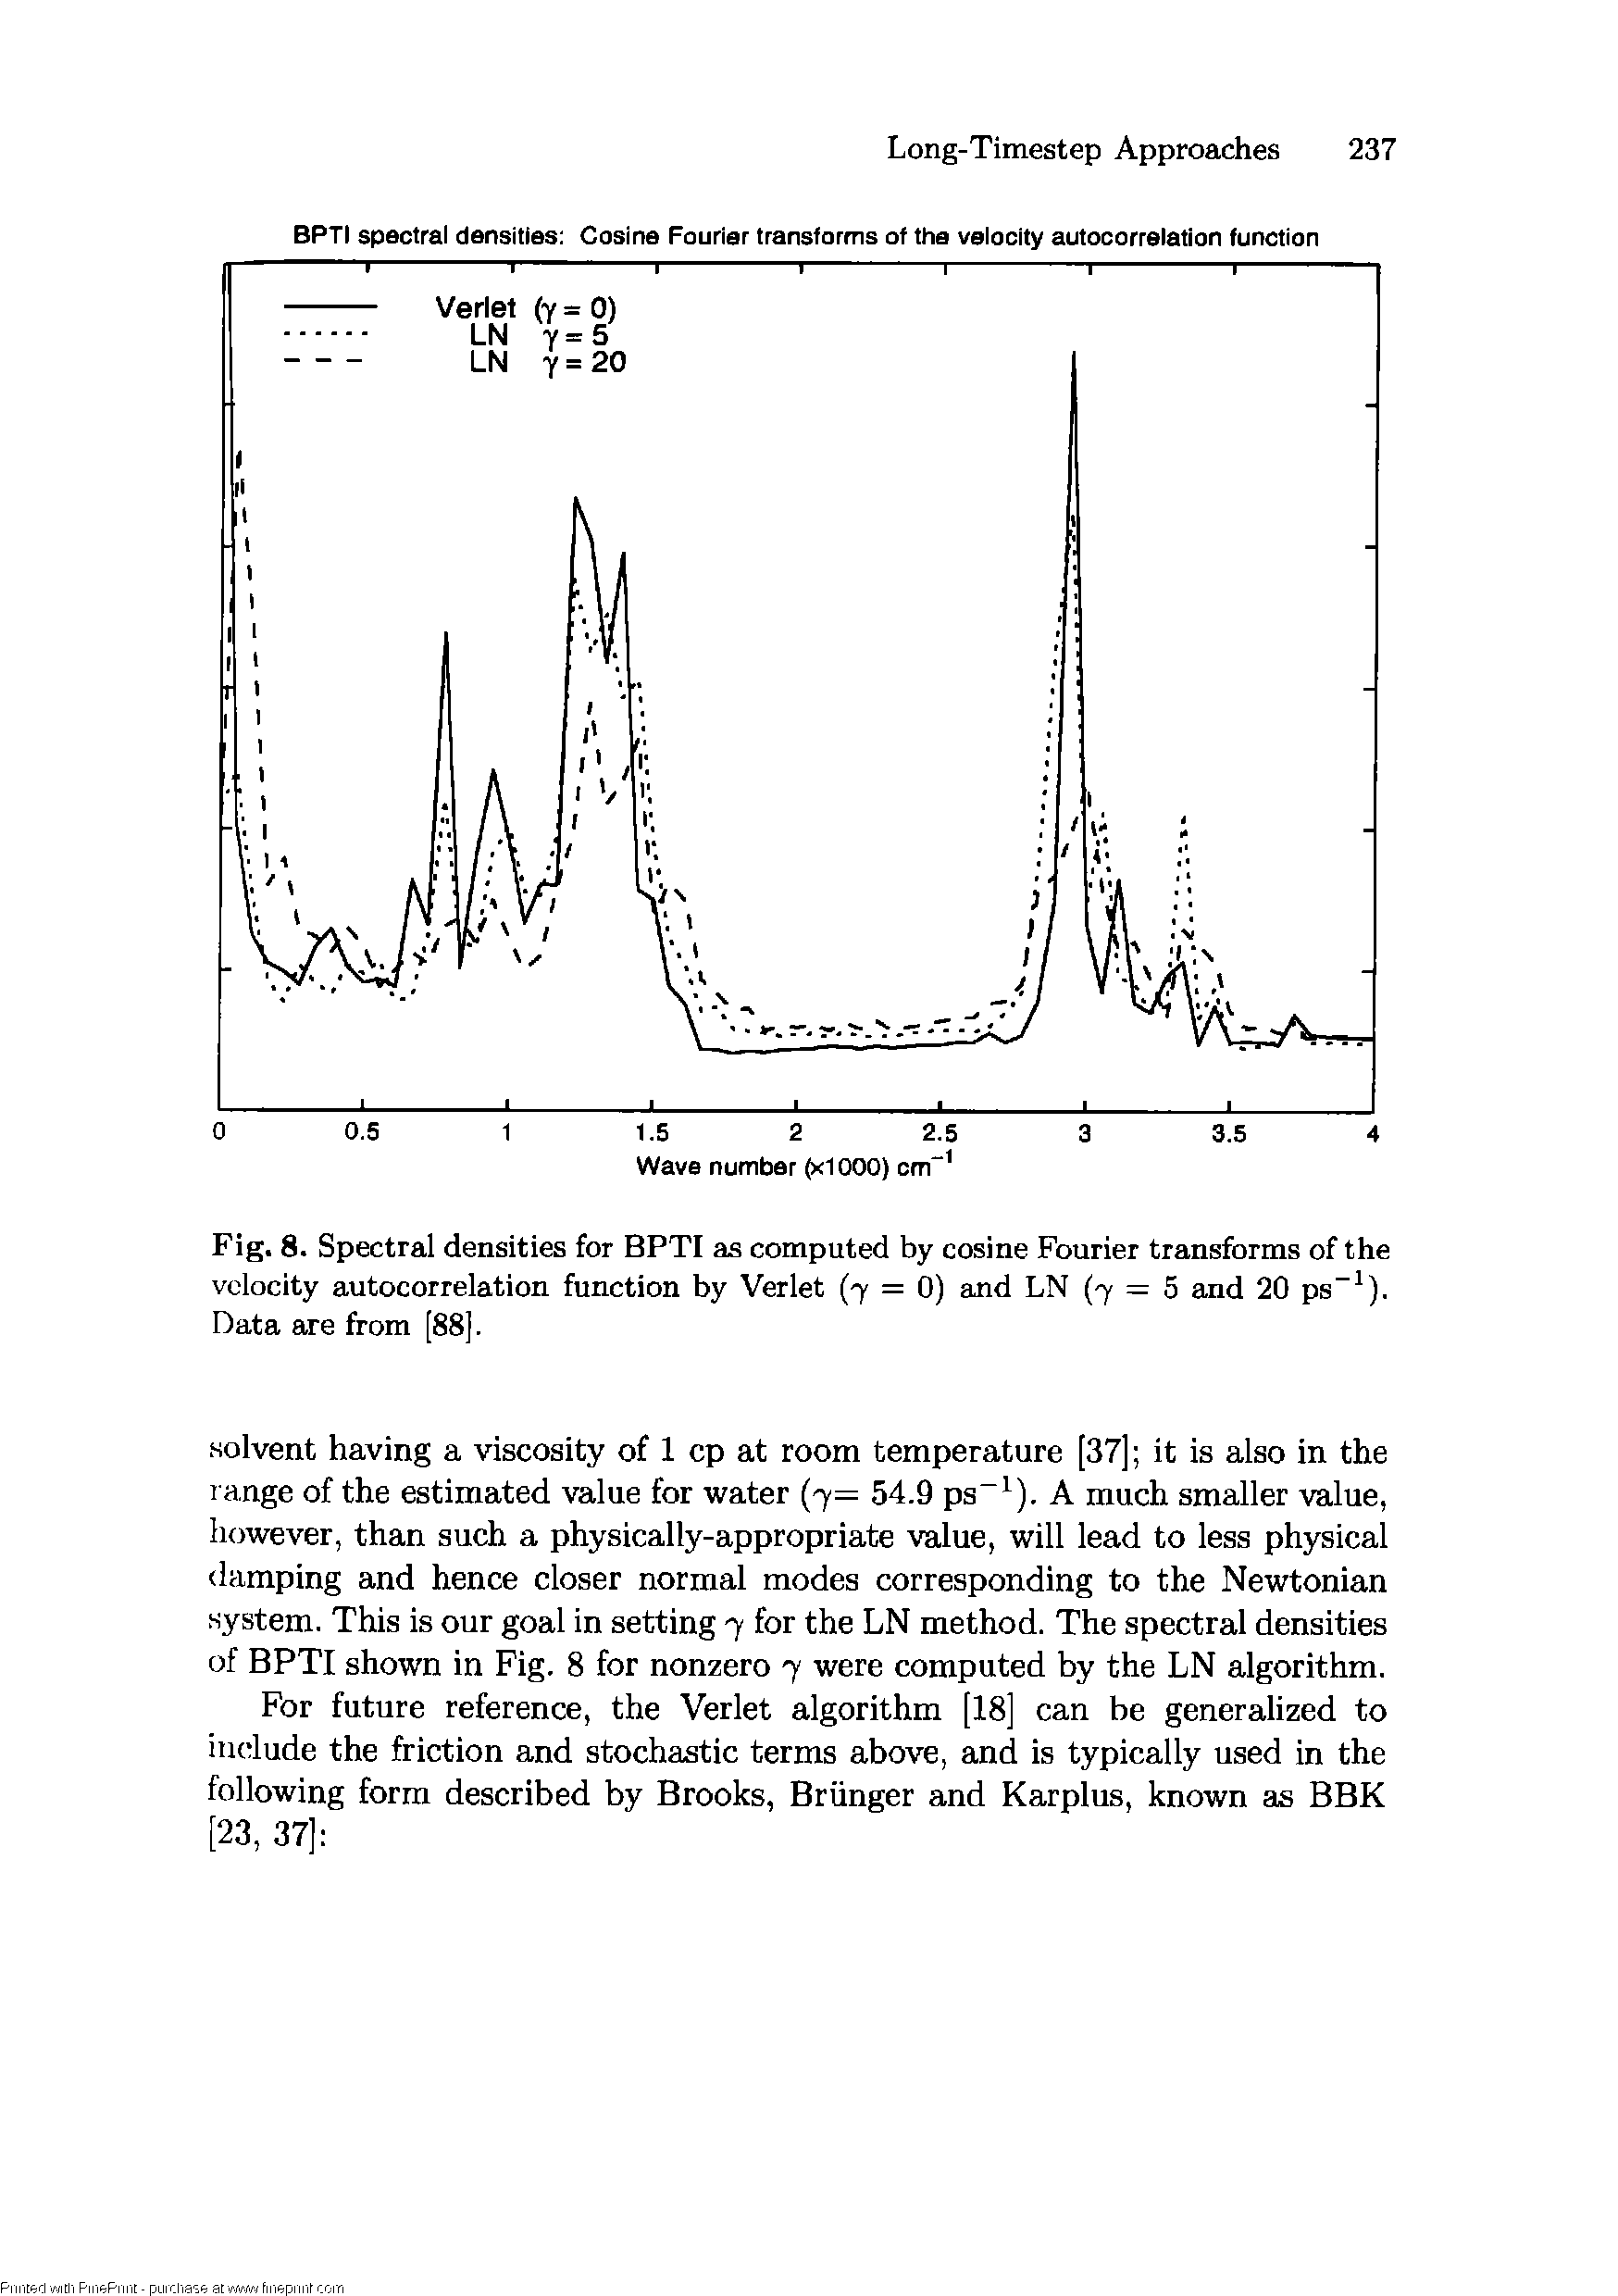 Fig. 8. Spectral densities for BPTI as computed by cosine Fourier transforms of the velocity autocorrelation function by Verlet (7 = 0) and LN (7 = 5 and 20 ps ). Data are from [88].